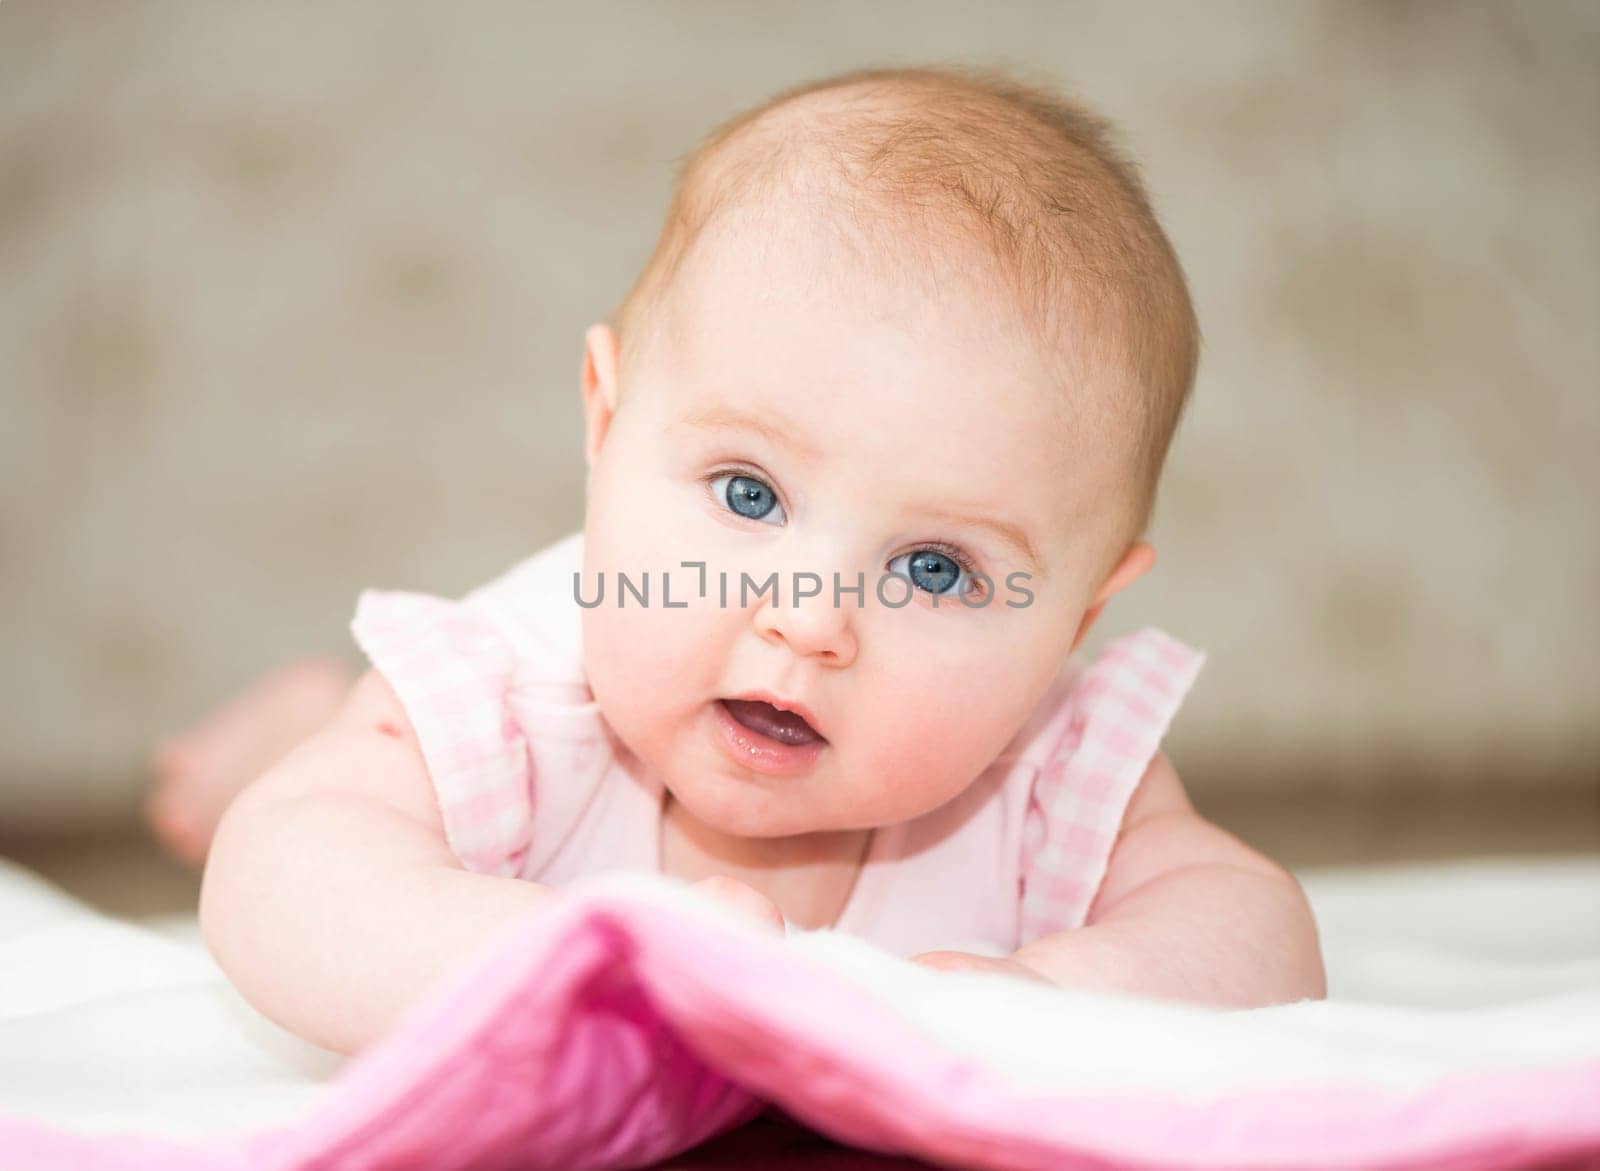 Portrait of cute 4-month-old baby close-up